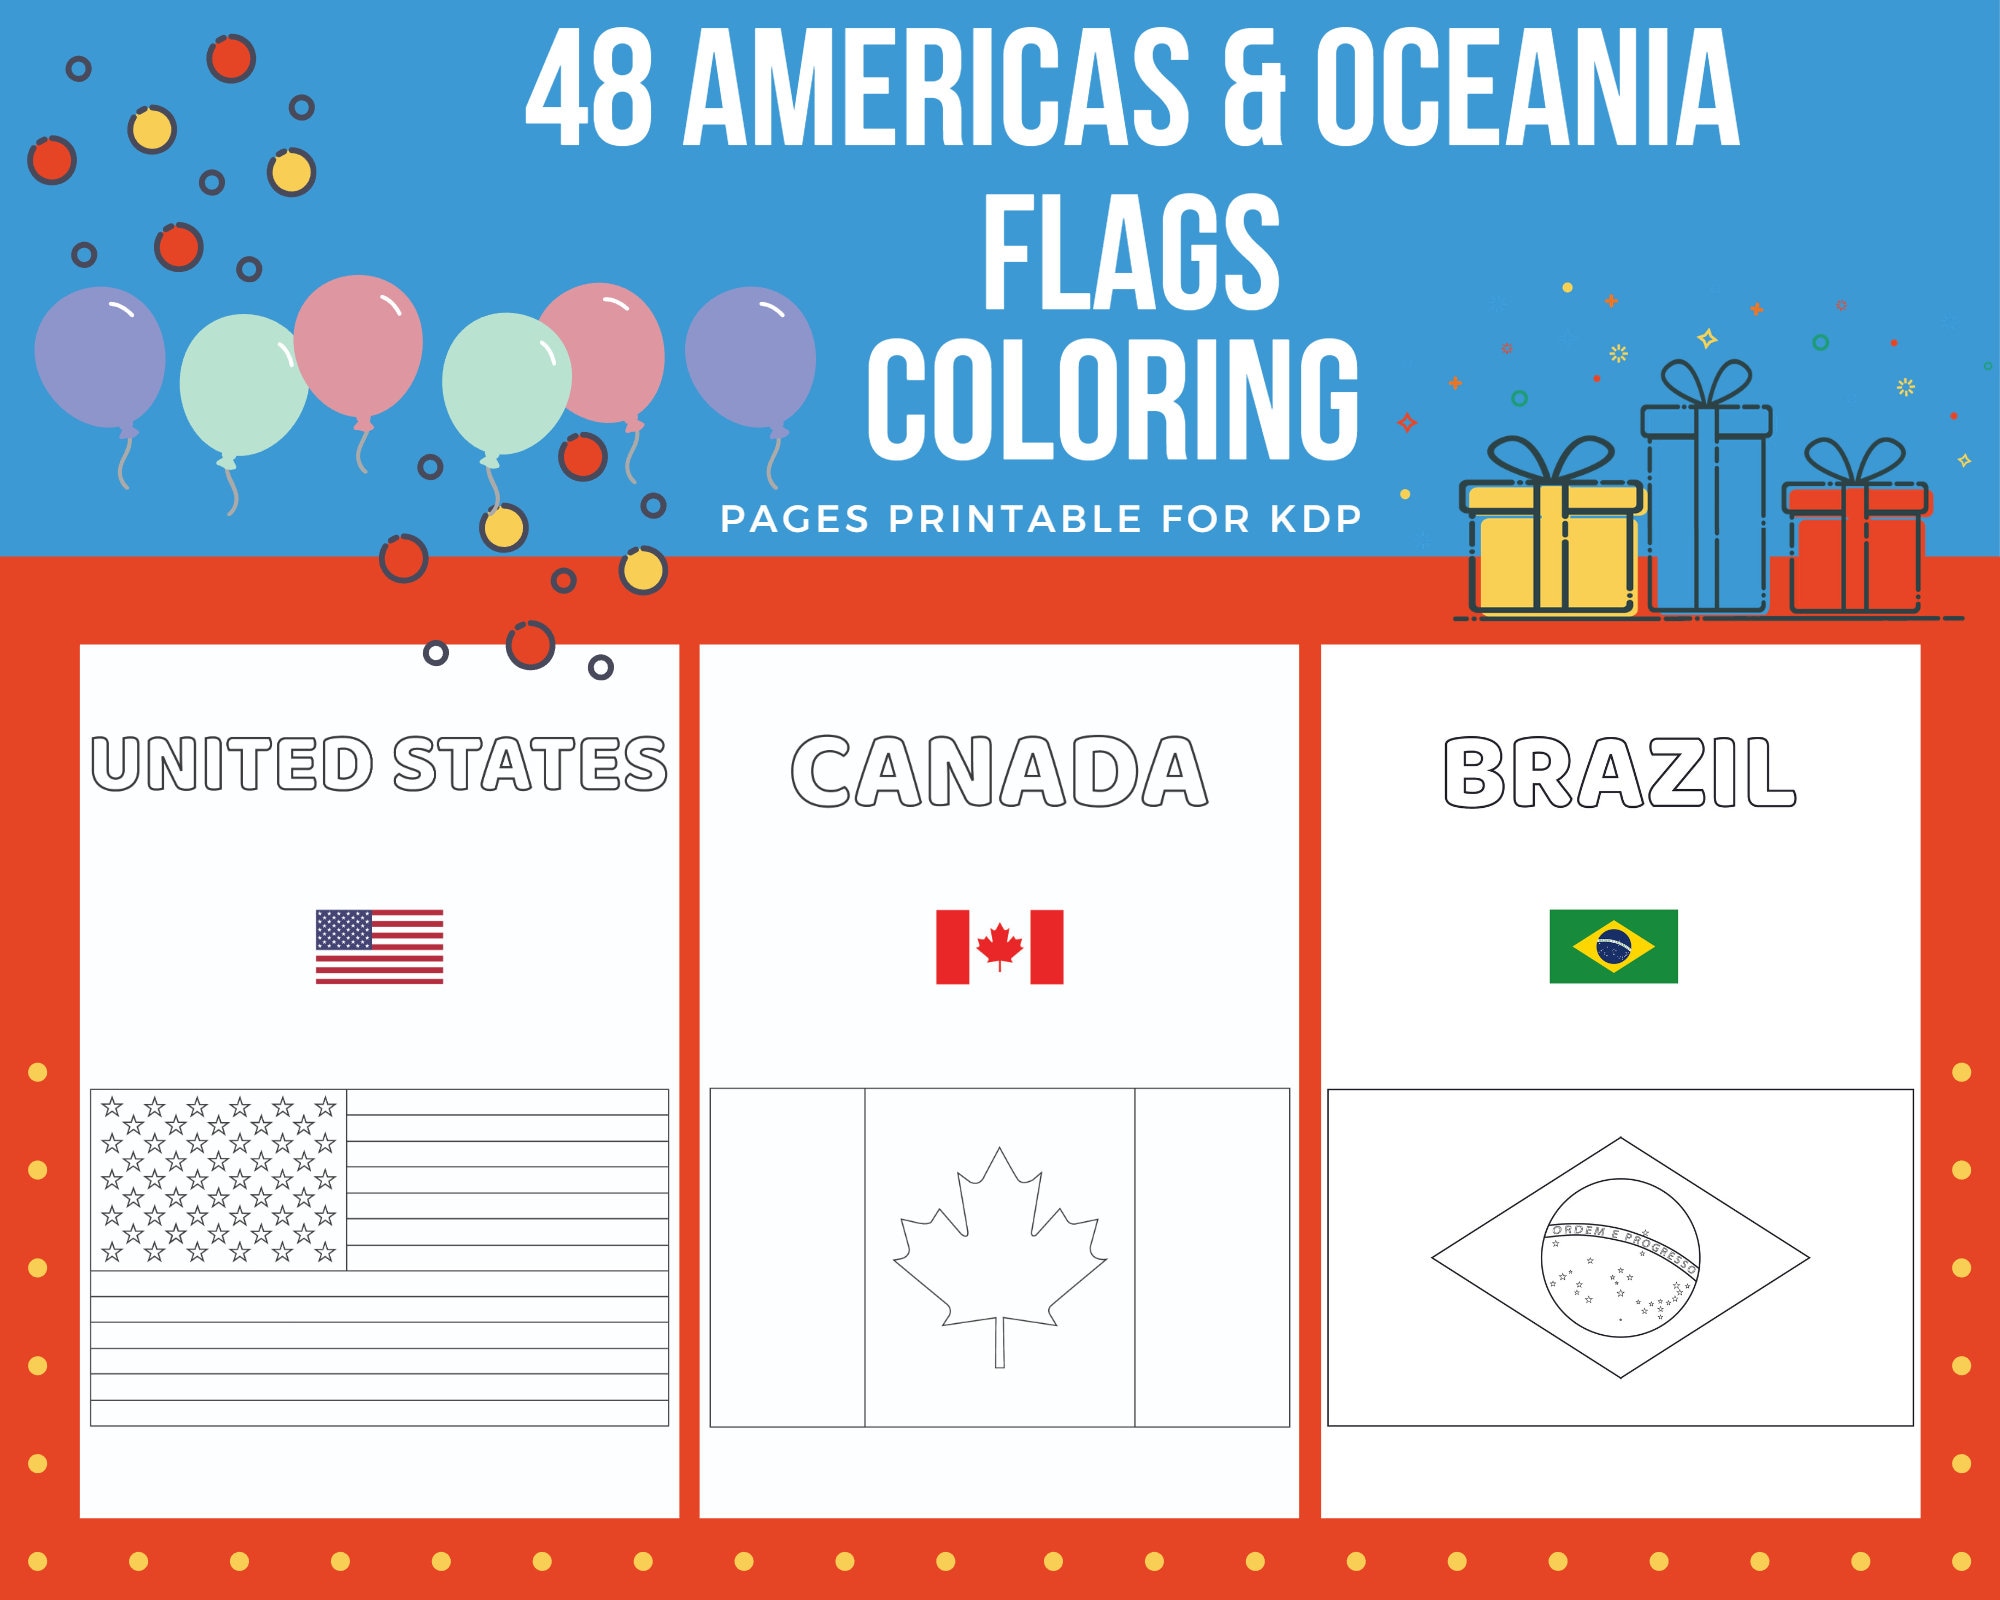 Americas oceania flags coloring pages printable for kids pdf file us letter instant download kdp coloring book for kids